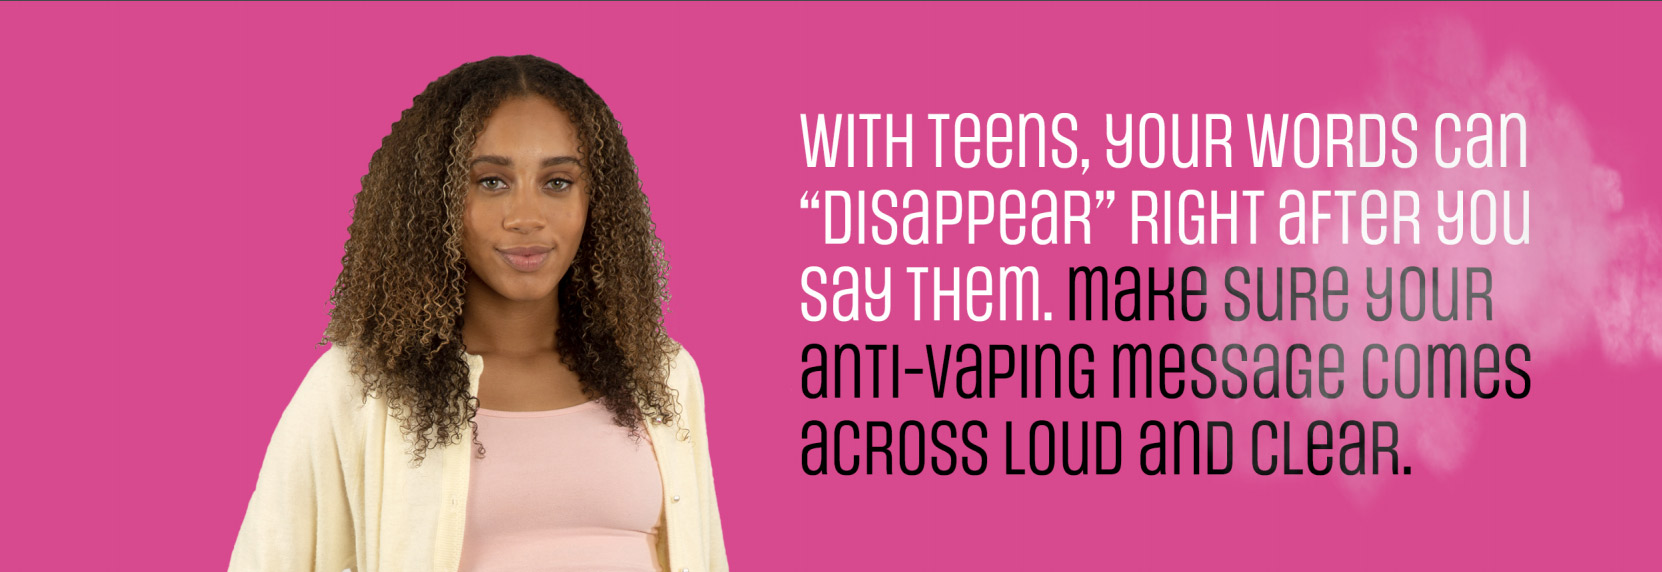 With Teens, your words can disappear right after you say them. Make sure your anti-vaping message comes across loud and clear.